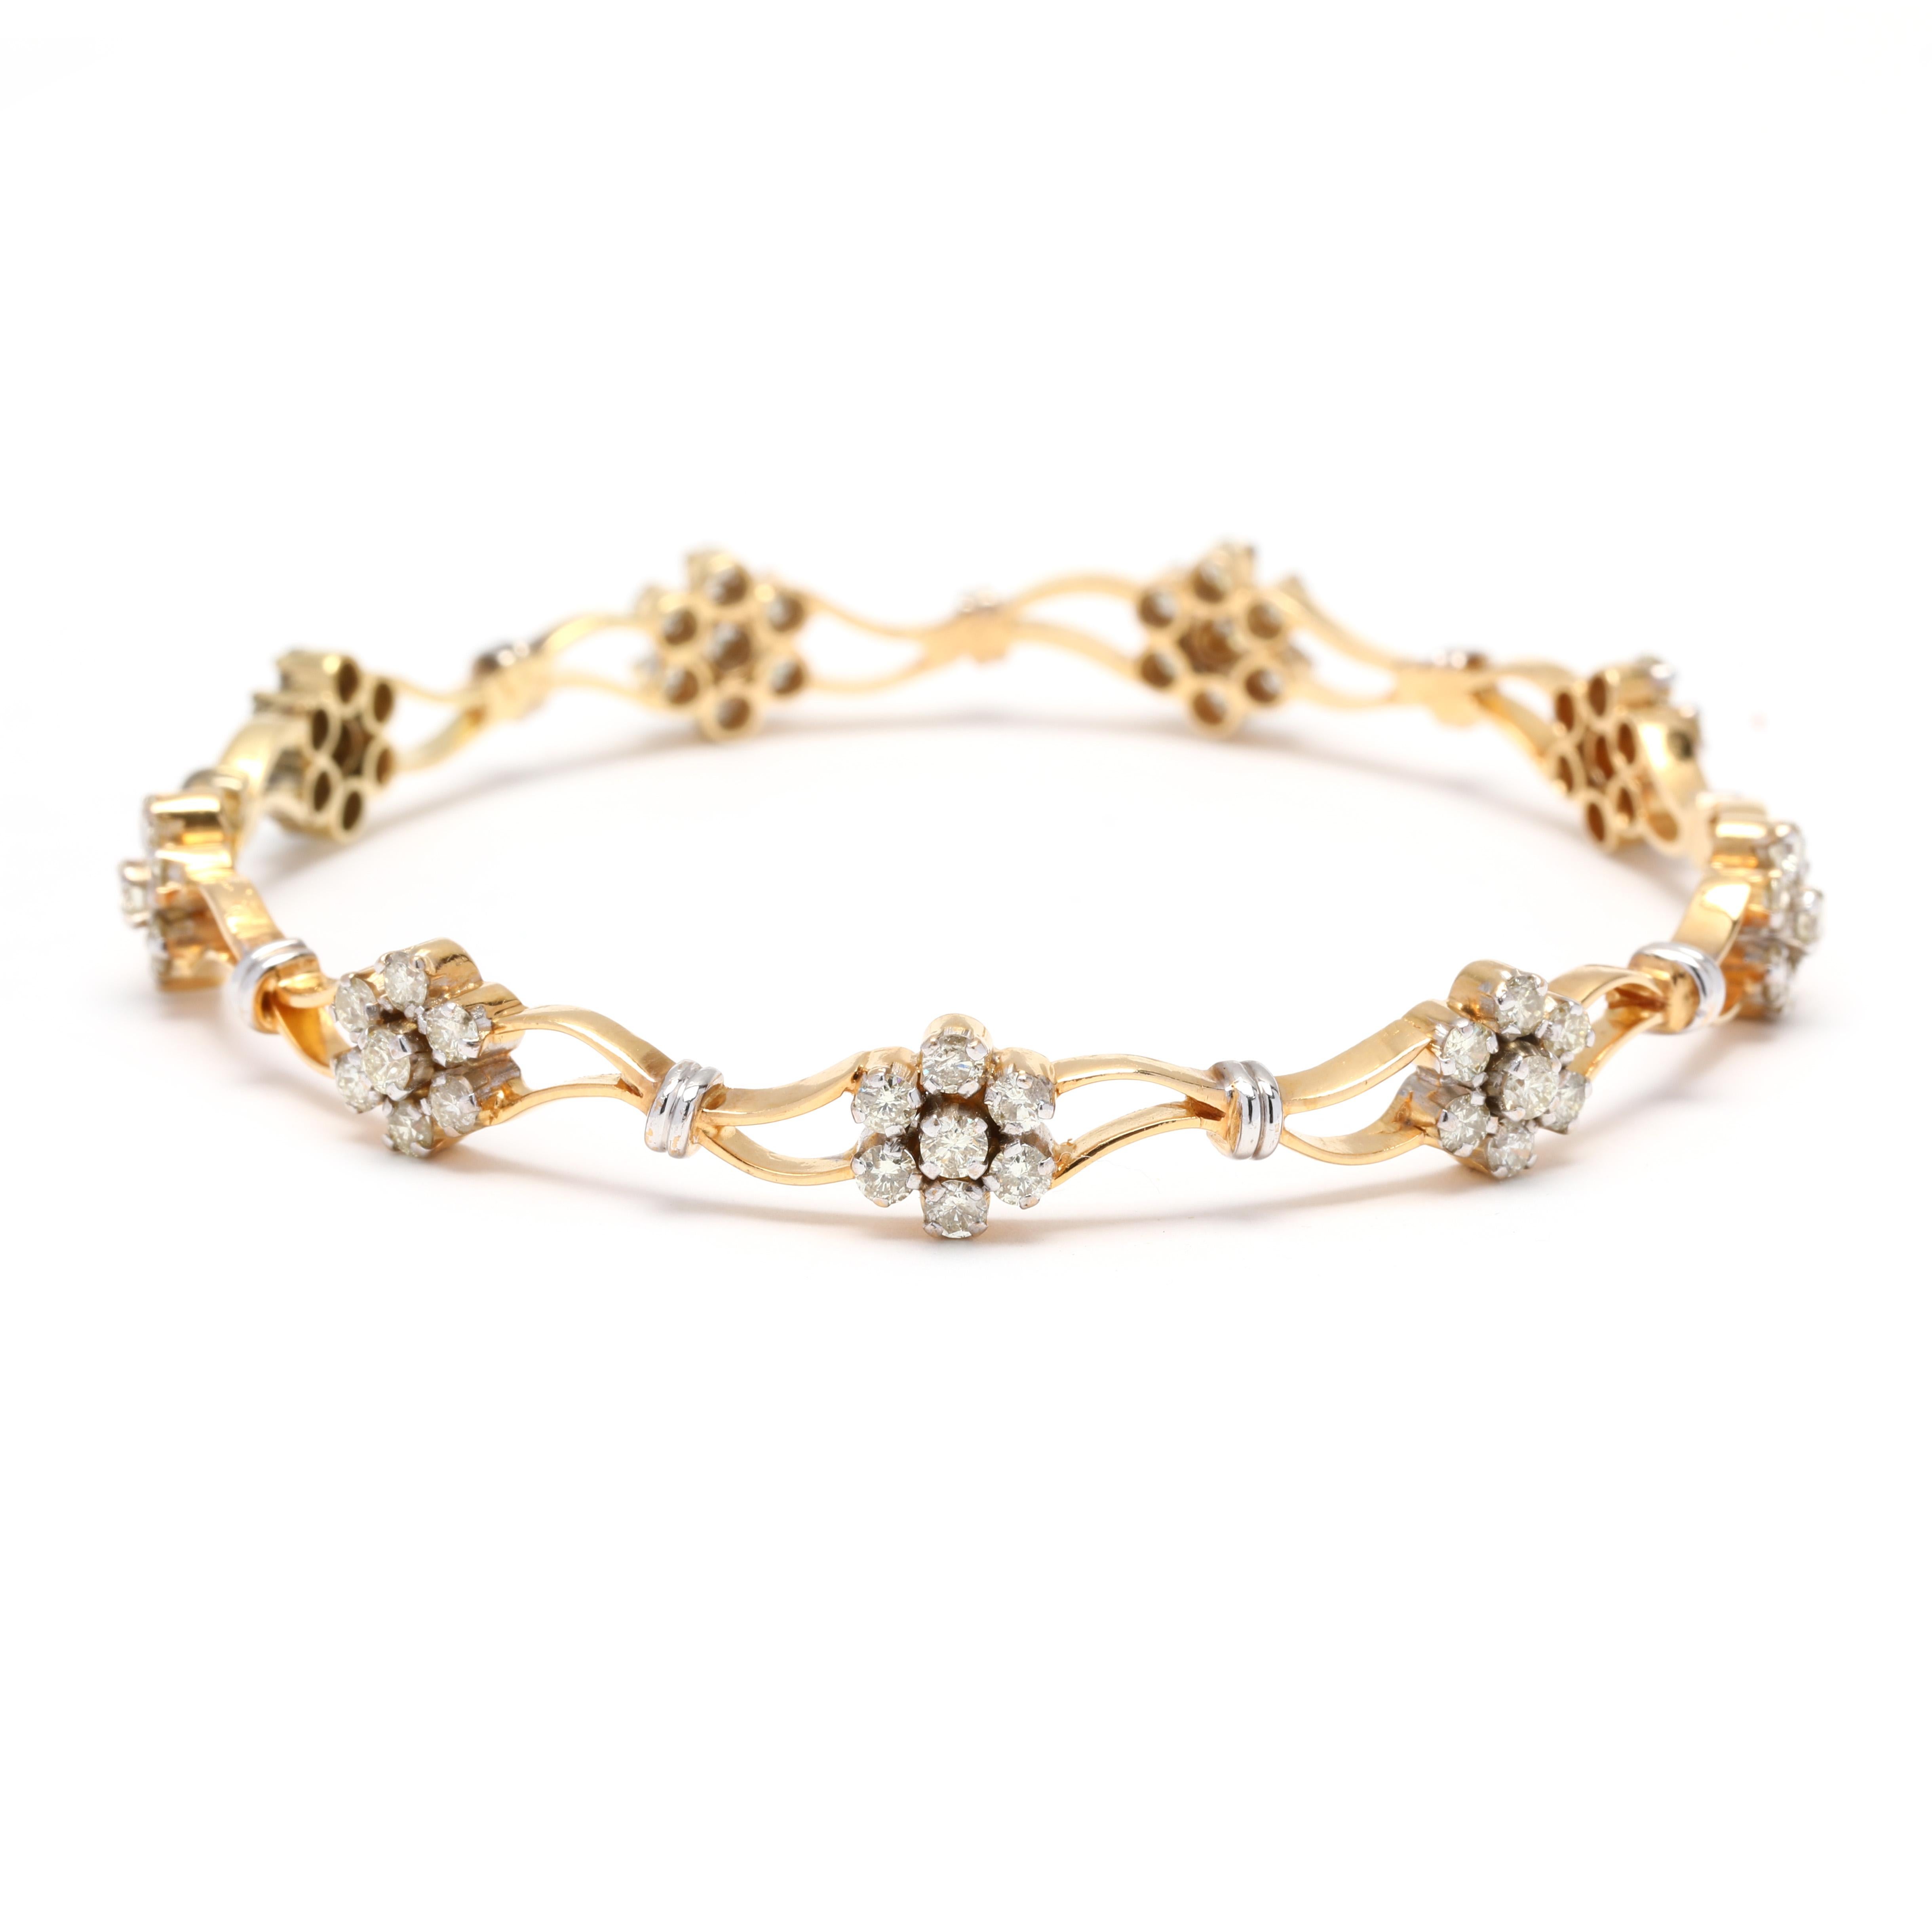 This diamond flower bangle is a versatile accessory that can be worn for any occasion. Whether you're dressed up for a formal event or looking to add a touch of sparkle to your everyday look, this bangle is sure to make a statement. Crafted with